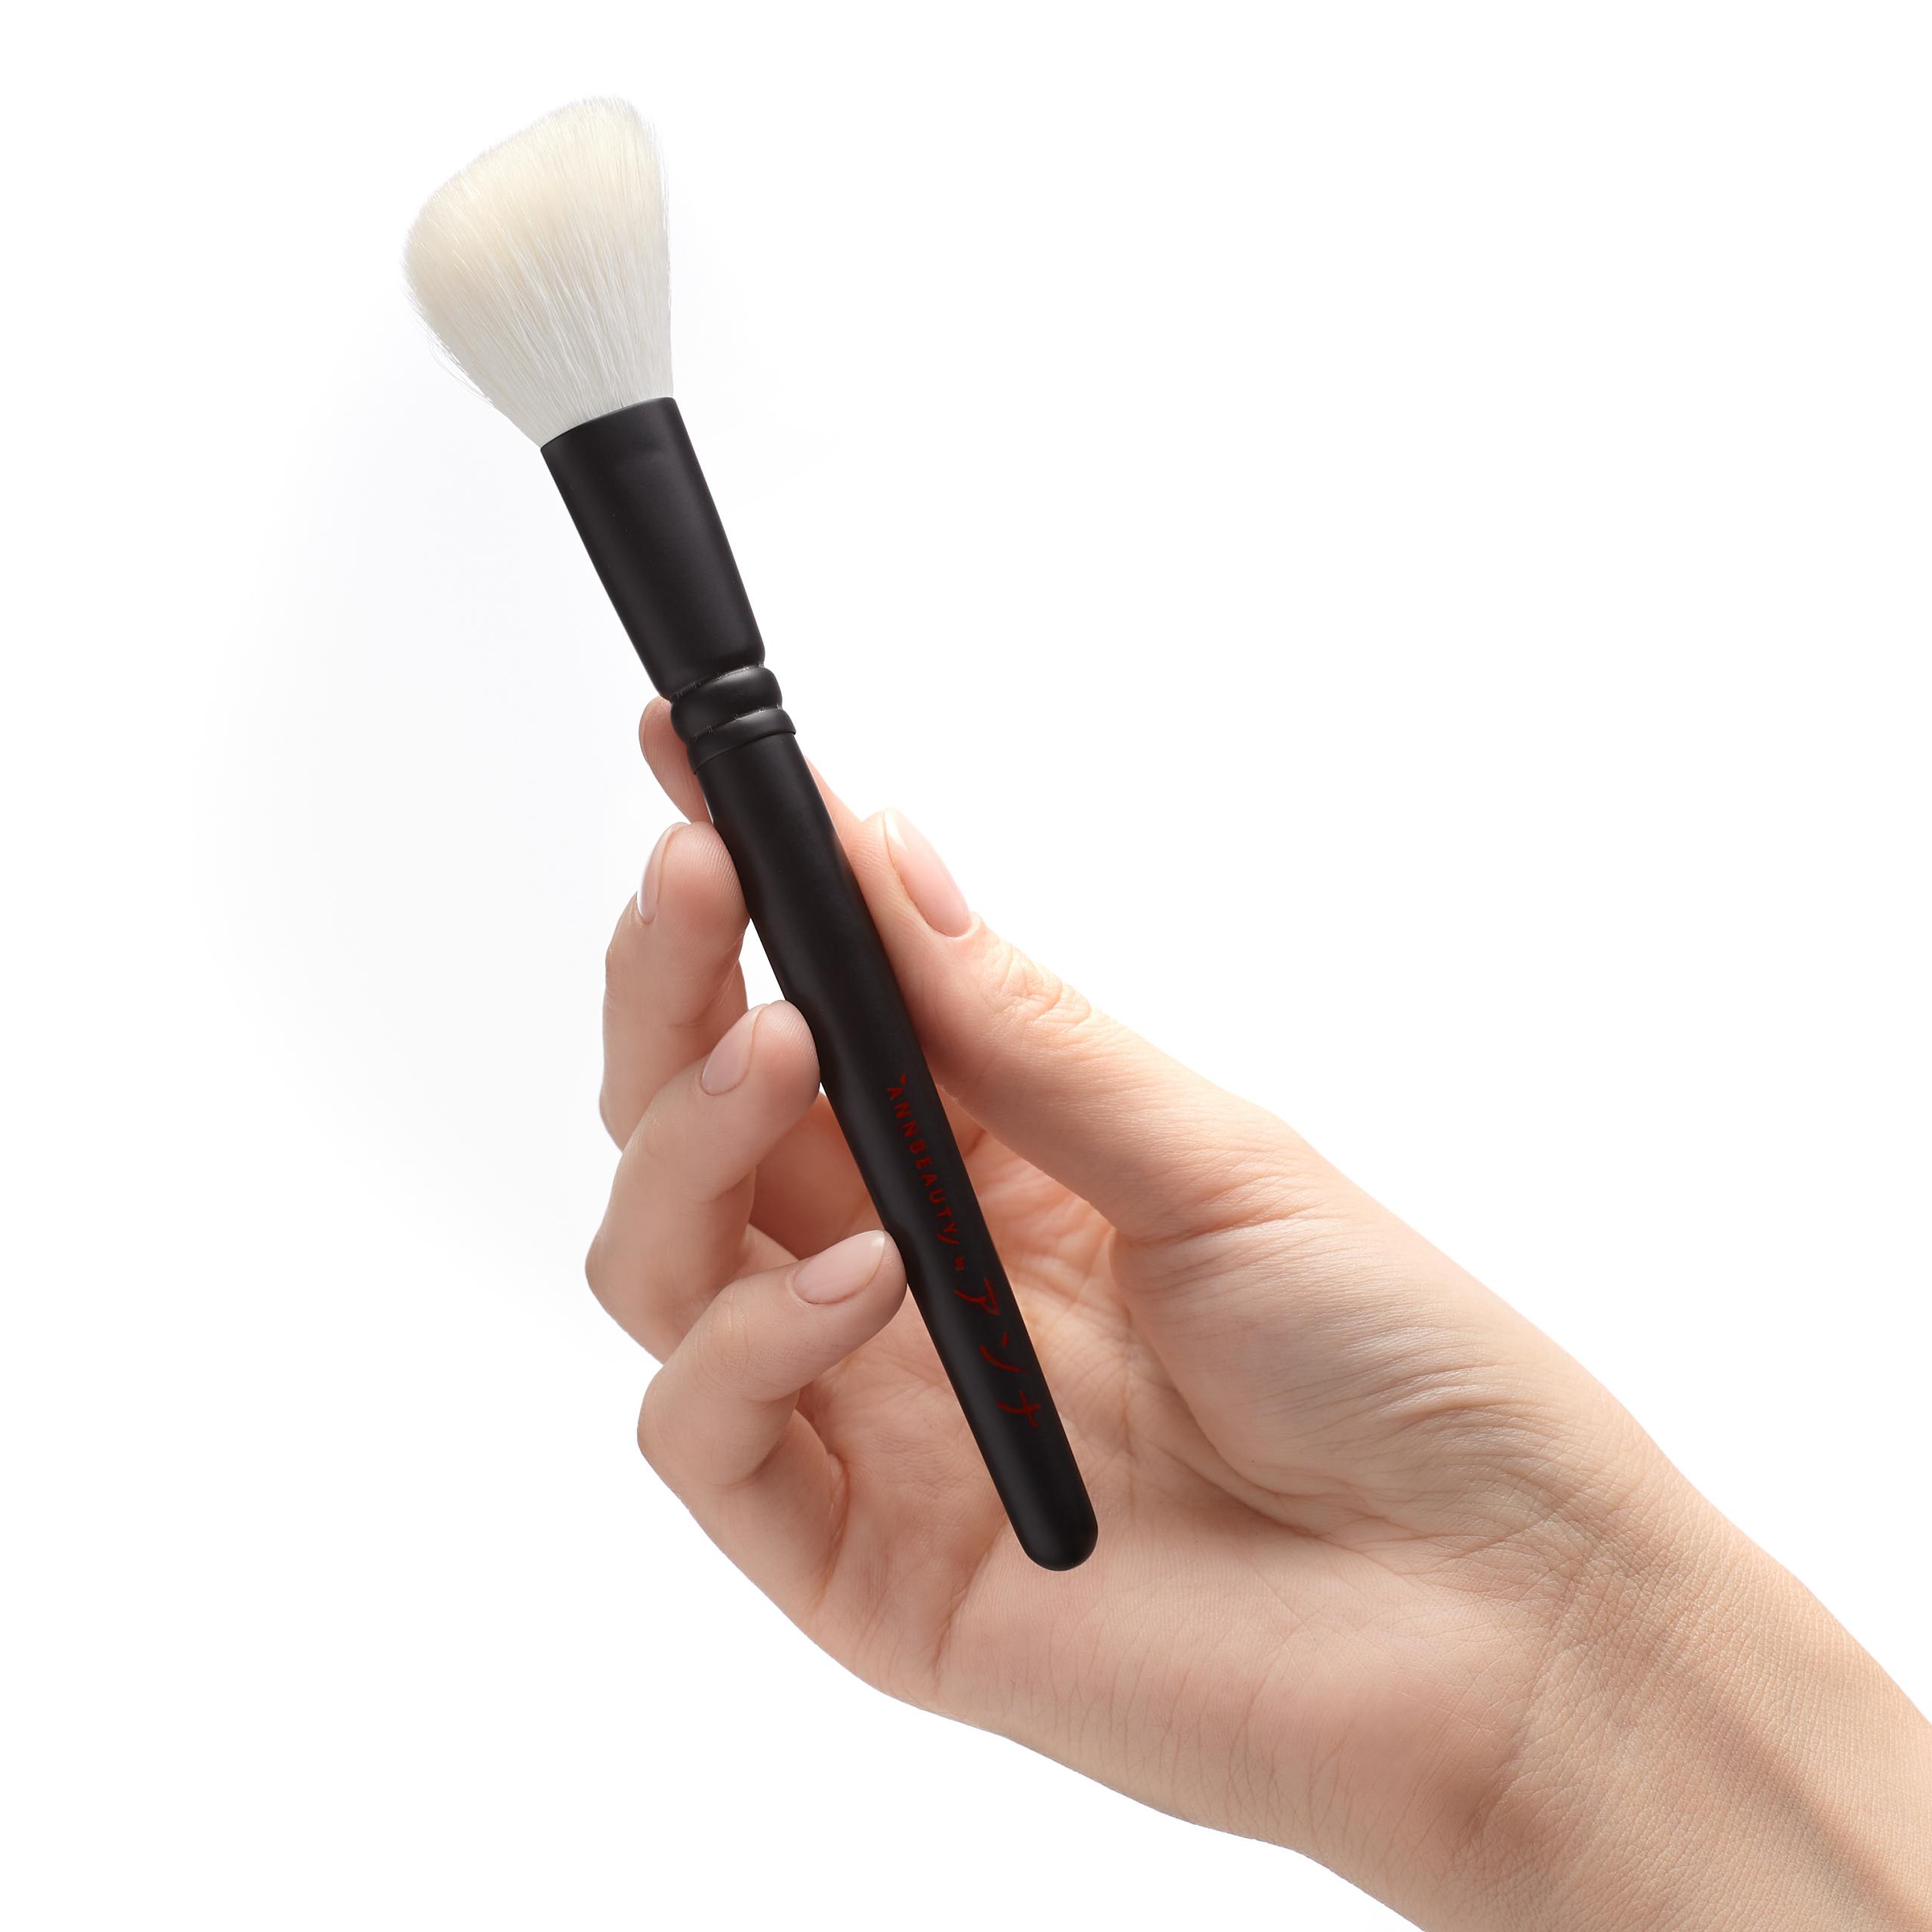 Annbeauty S22 Sculpting Brush in hand